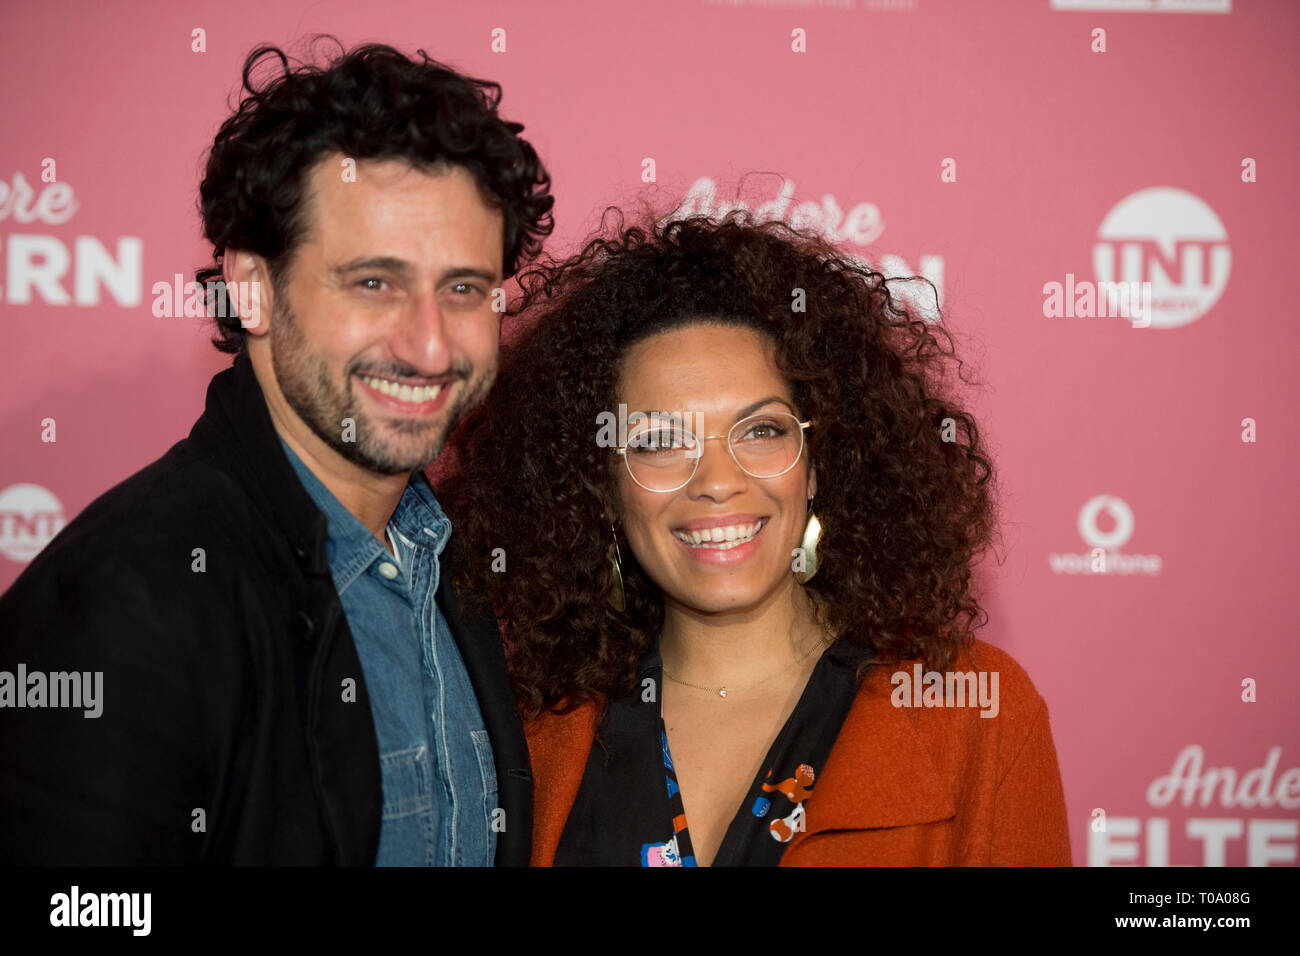 Rebecca LIMA, actress, Serkan KAYA, actor, portrait, portrÃ t, portrait, cropped single image, single motive, red carpet, red carpet show, arrival, arrival, premiere 'Other Parents' on 14th March 2019 at the Residenz cinema in Koeln. | Usage worldwide Stock Photo